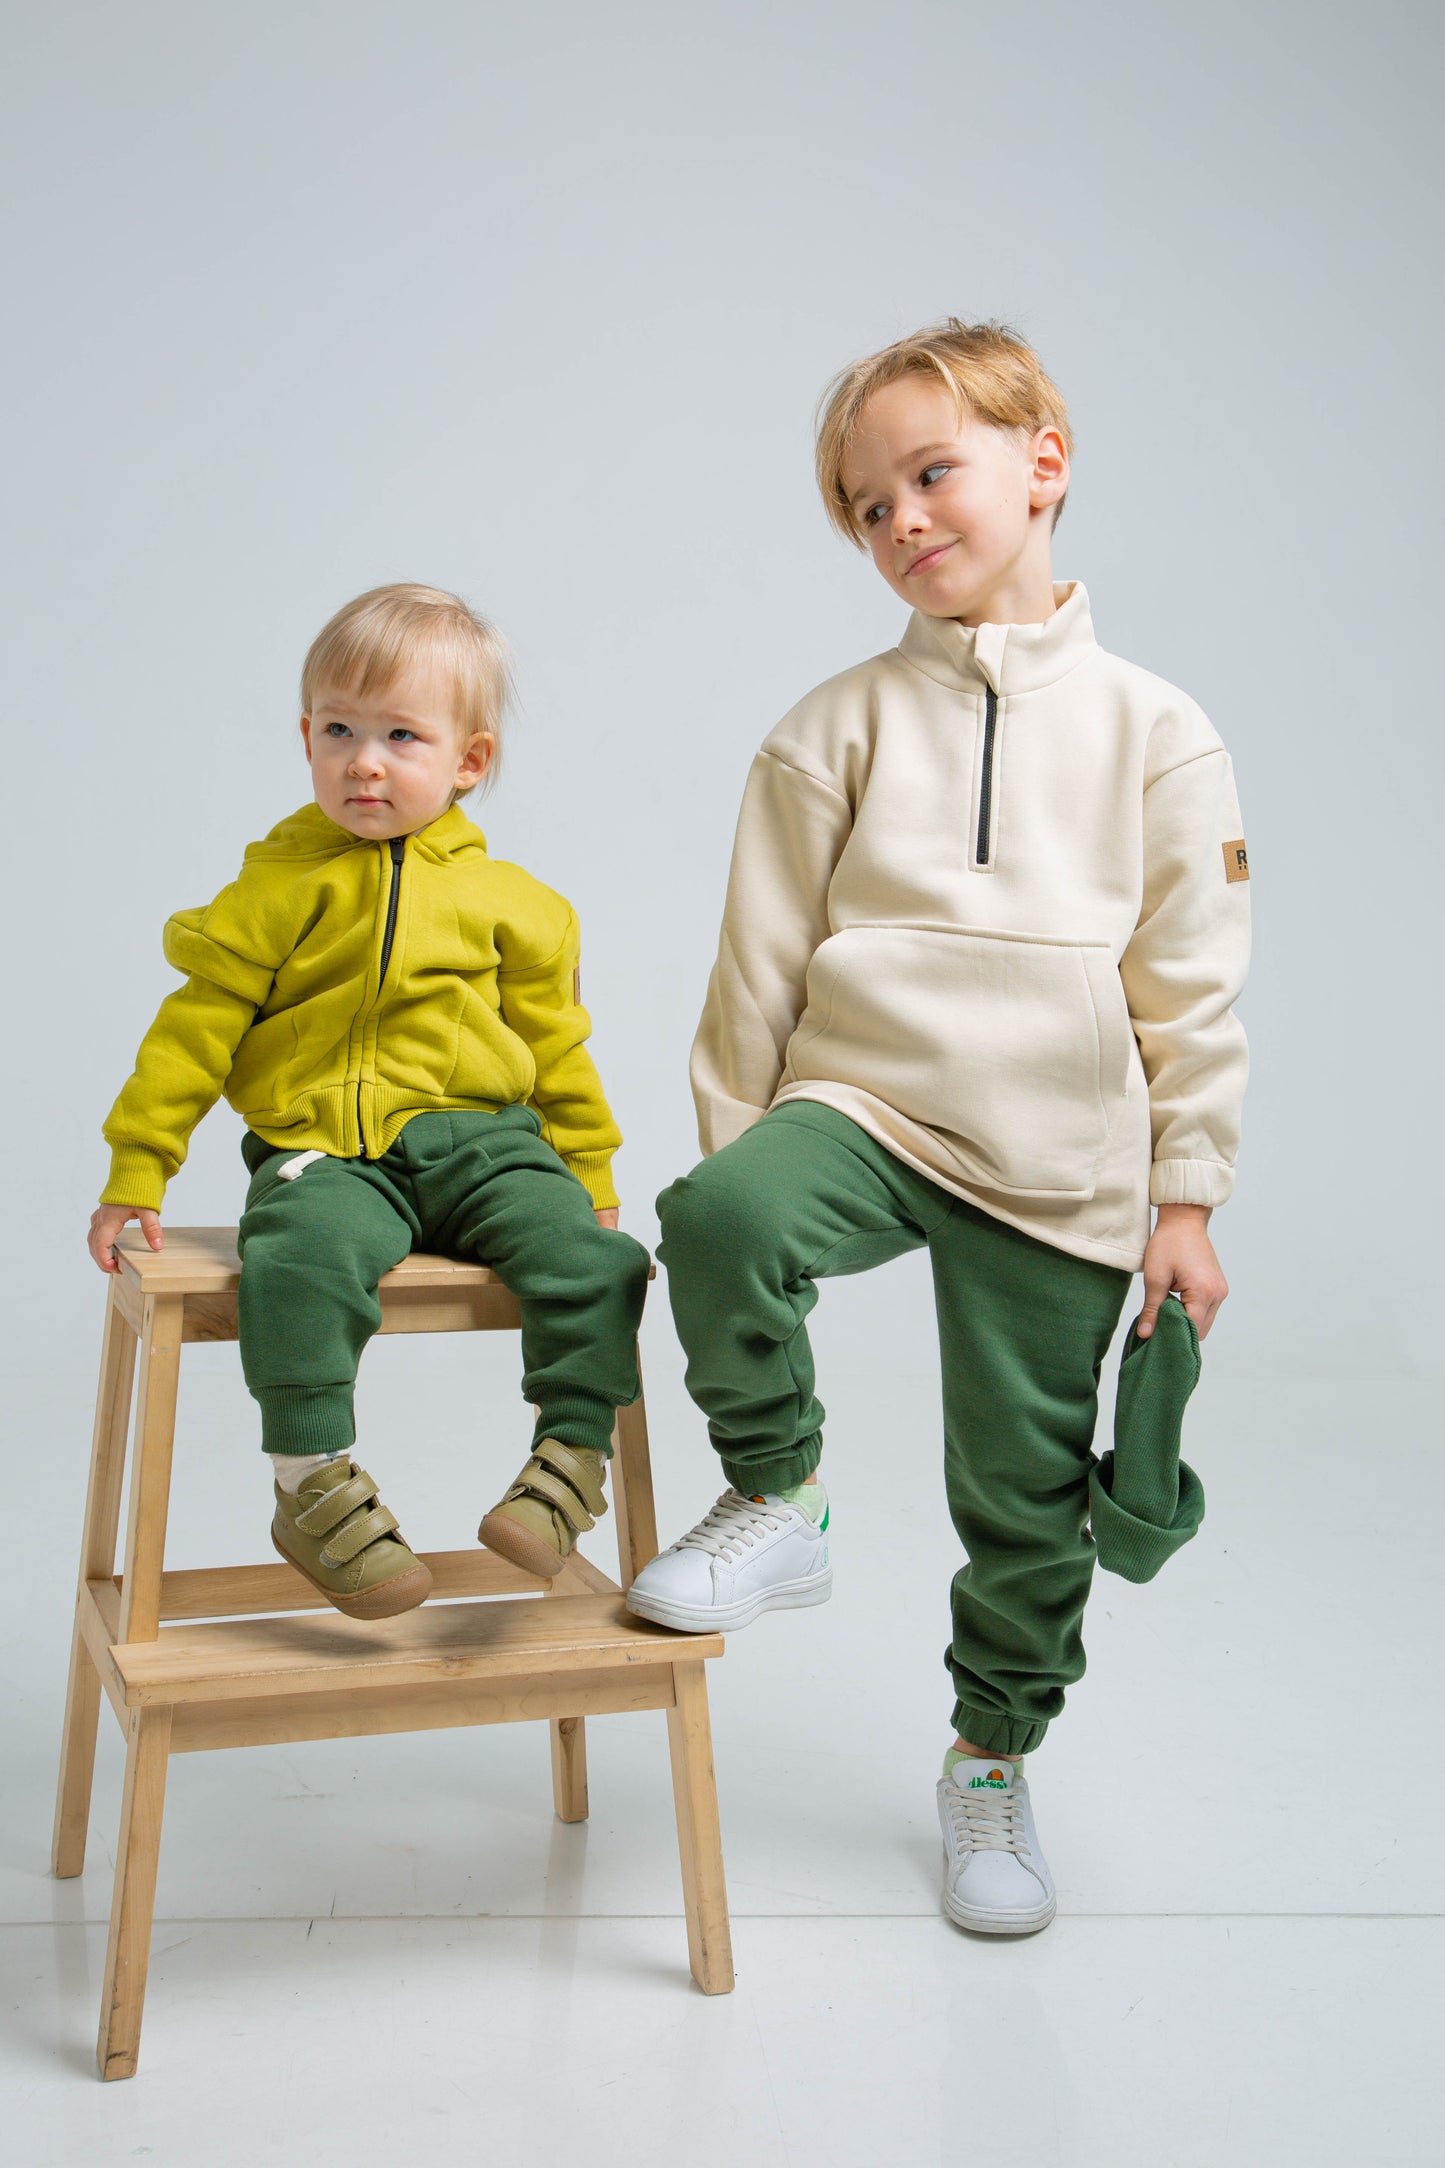 Children's winter clothing sets 3-piece outfit.